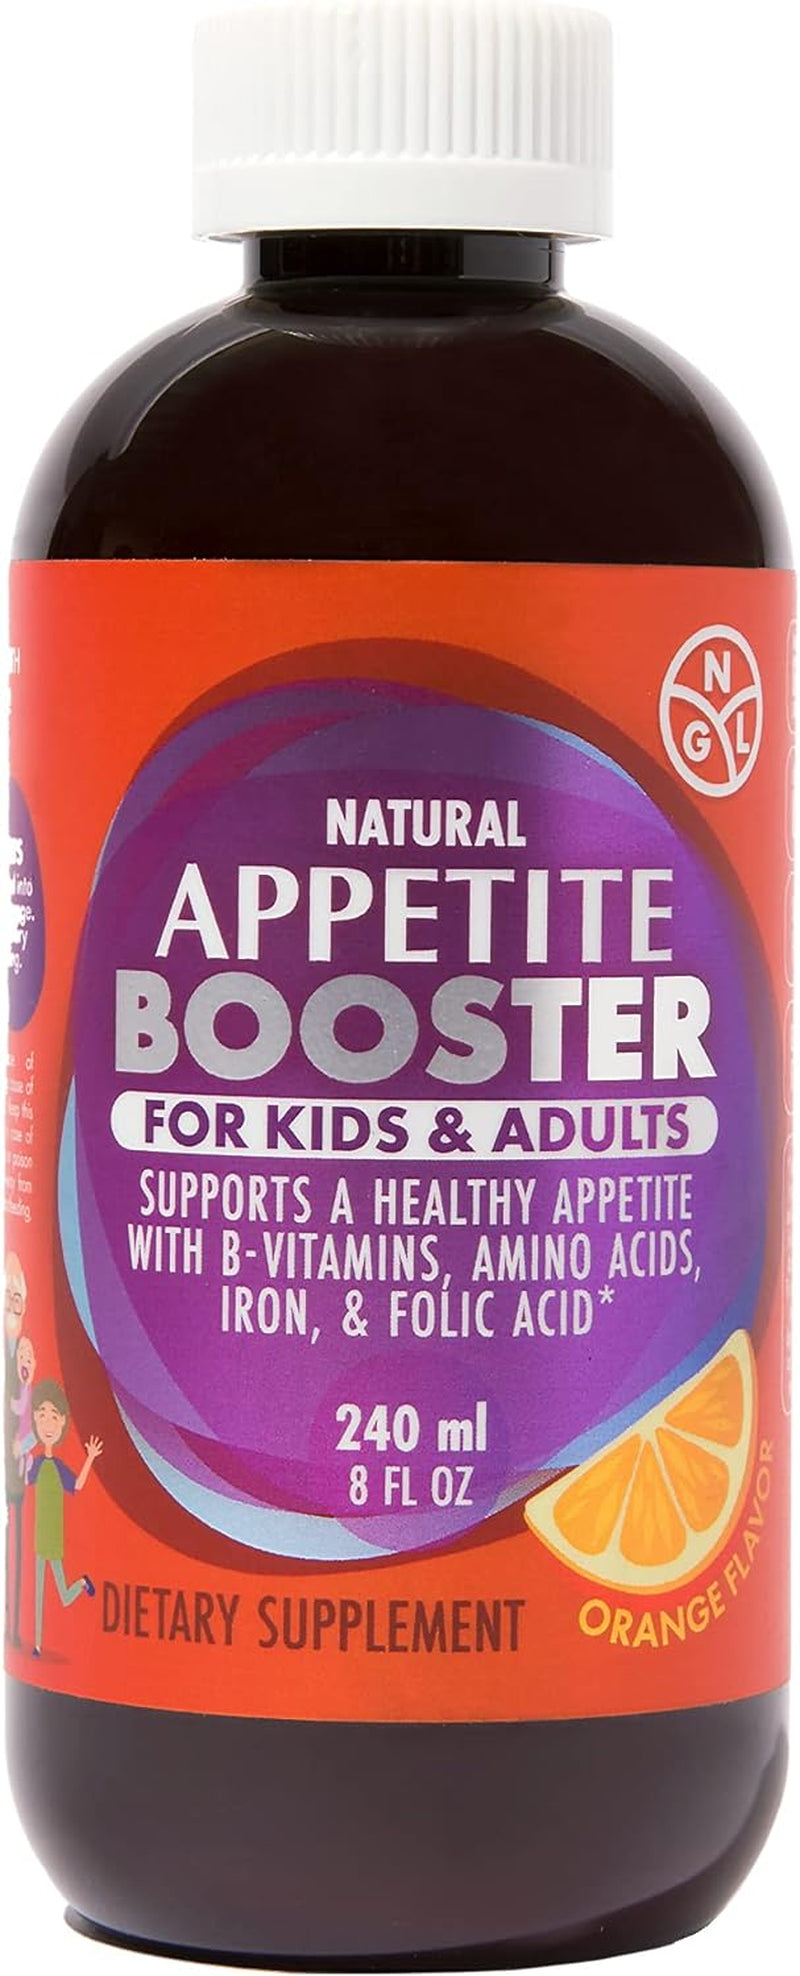 "Nutritional Supplement for Appetite Stimulation and Weight Gain Support for Underweight Adults & Kids 4+ Enriched with Essential Vitamins, Minerals, Amino Acids, and Flax Seed Oil"